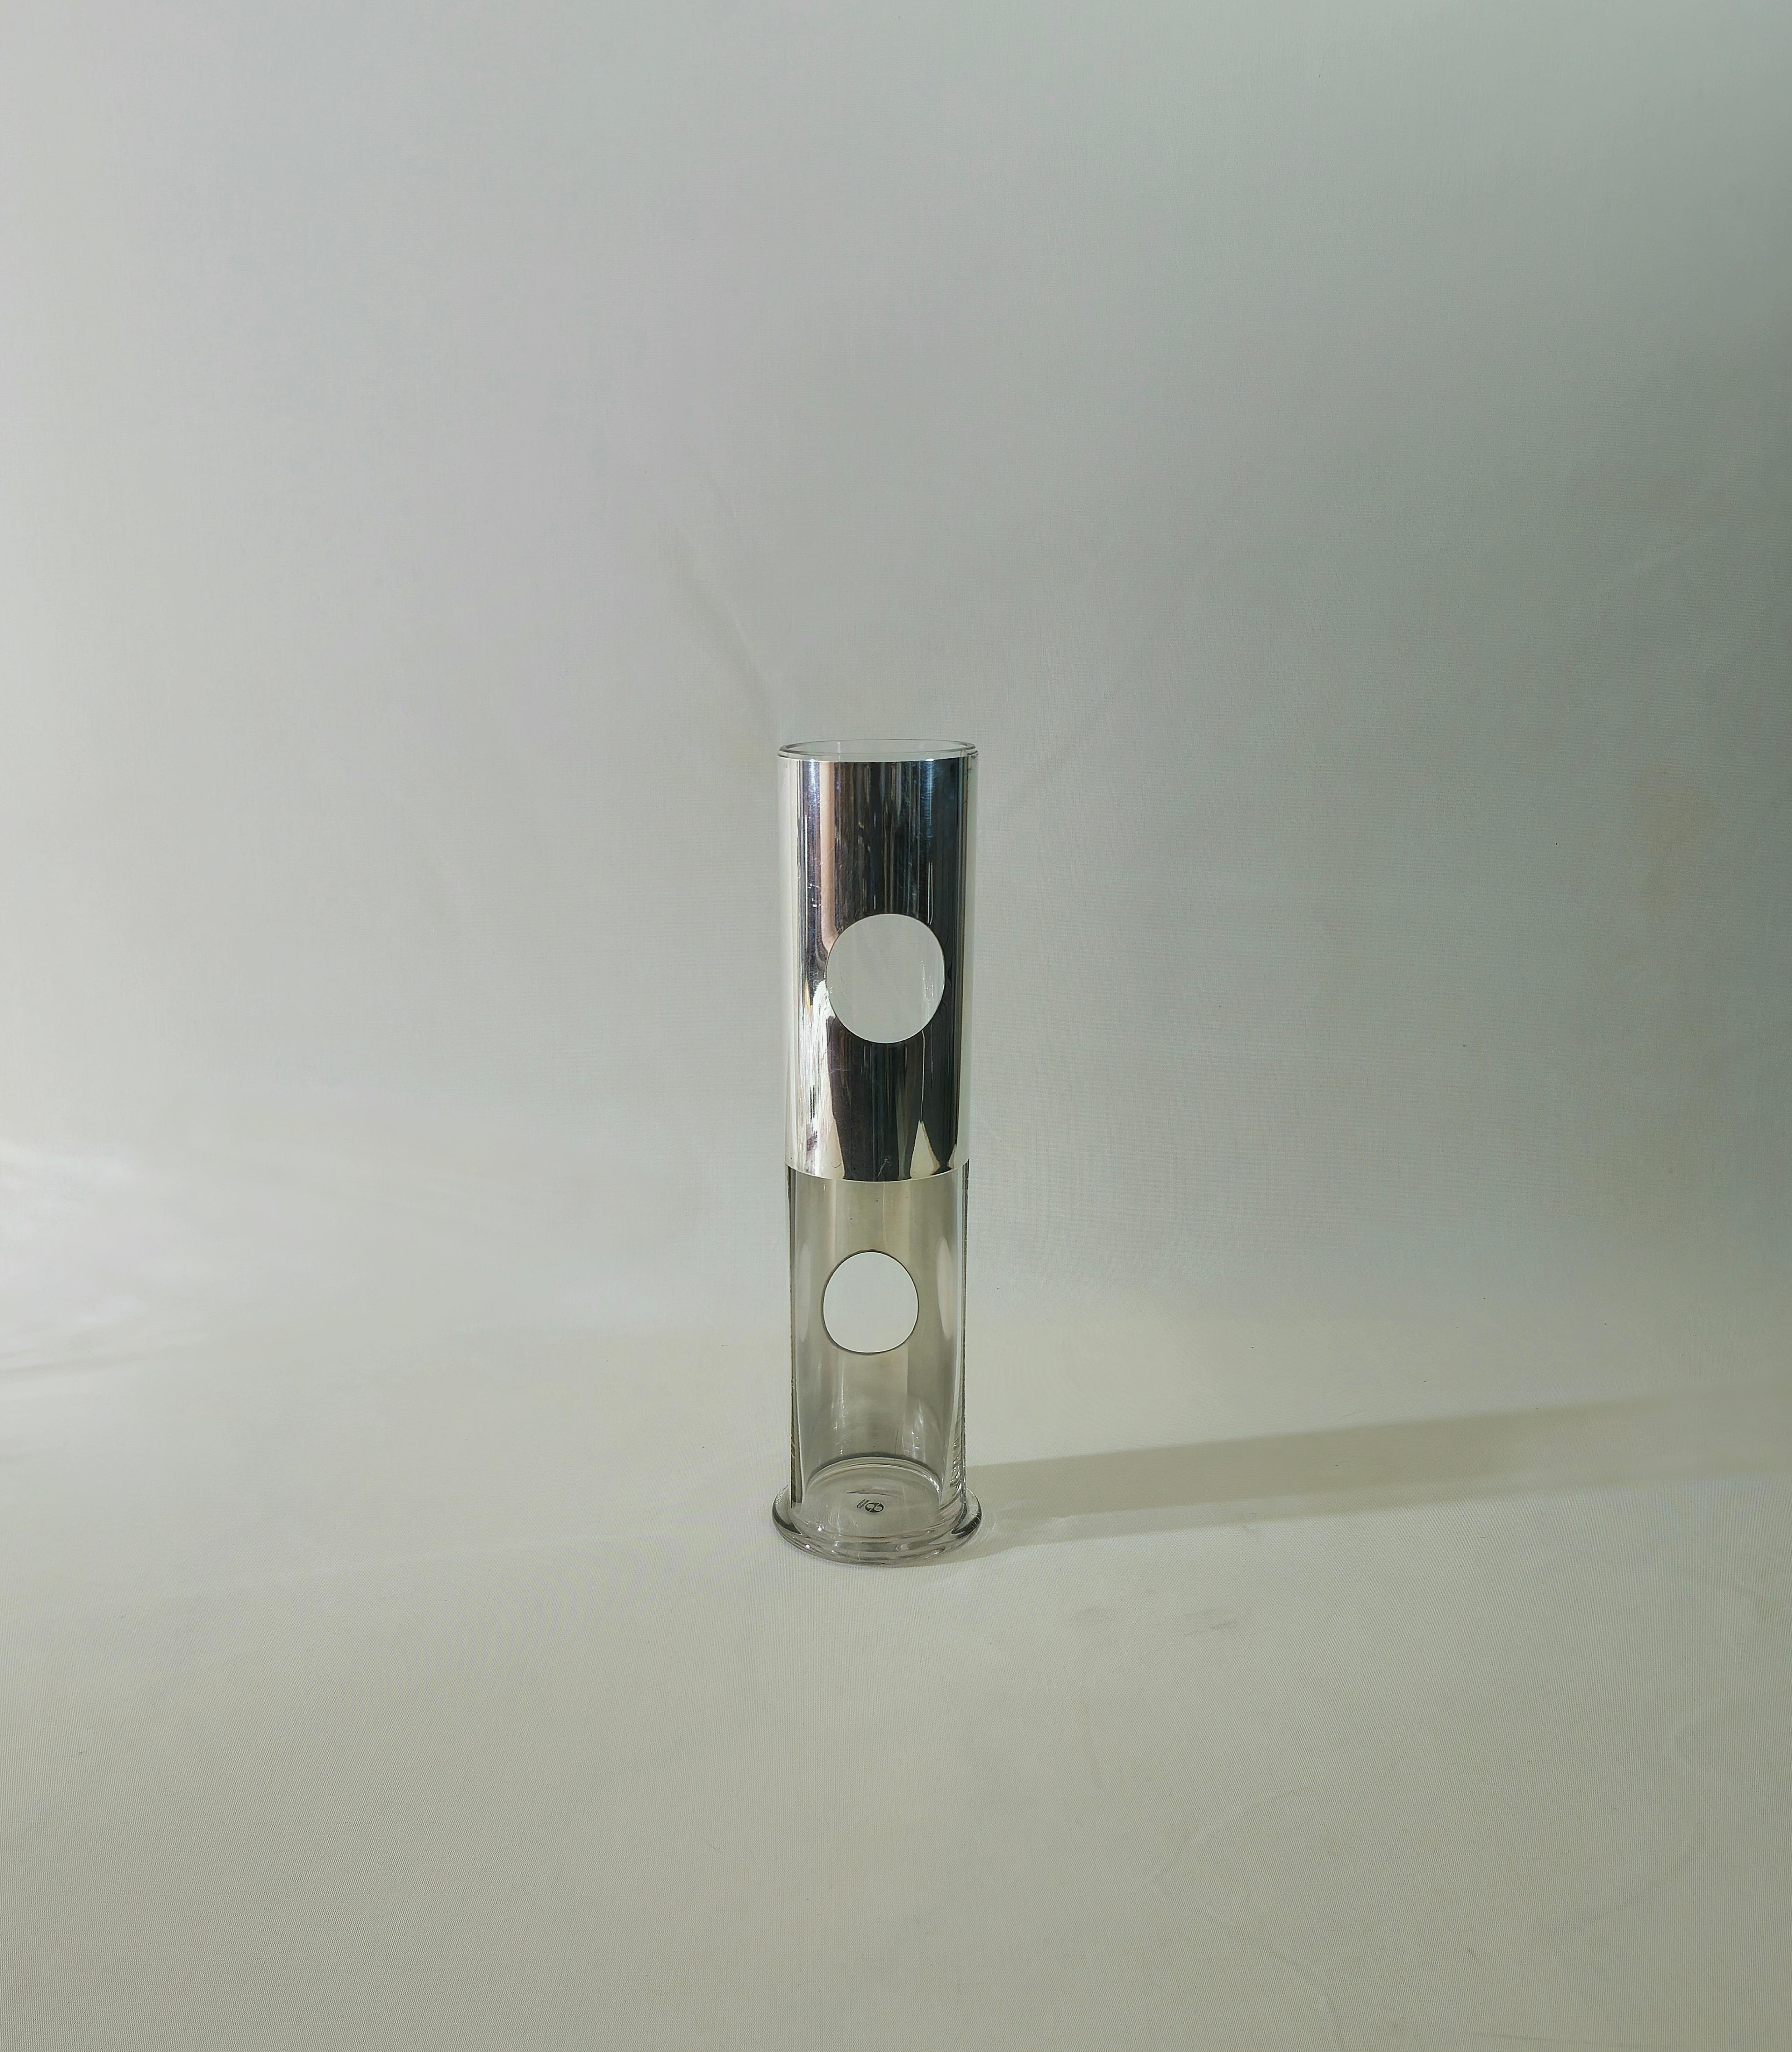 Glass and silver metal vase by Lino Sabattini, 1970s Design Italy Midcentury For Sale 1